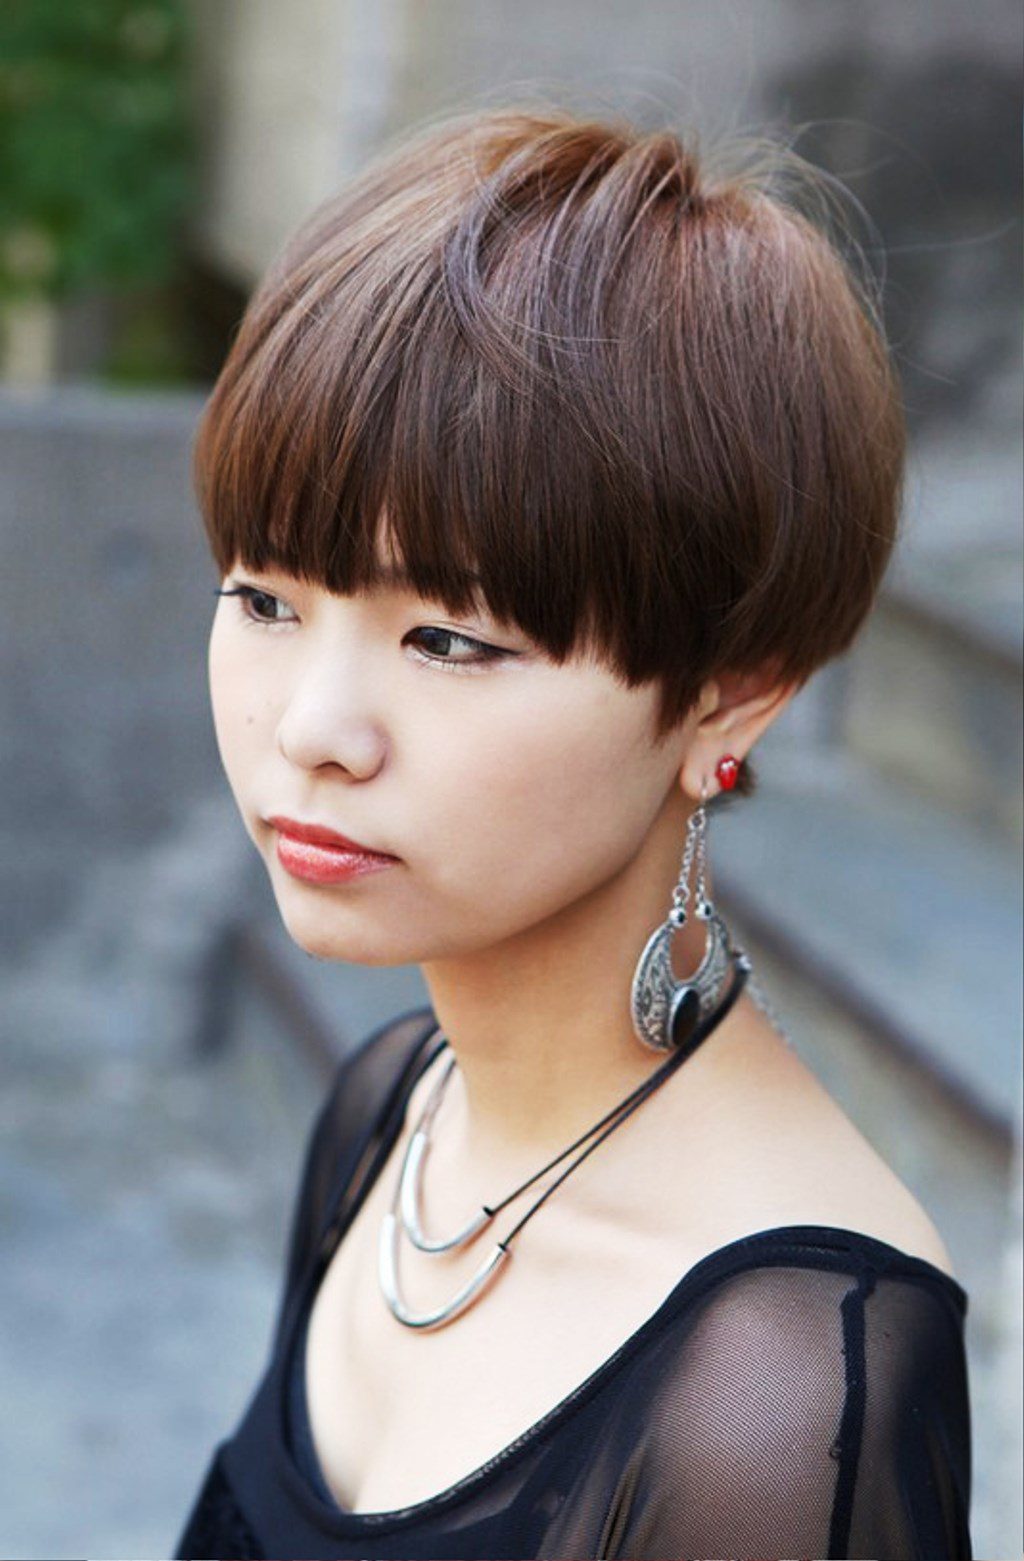 Cute Short Japanese Girls Hairstyle With Blunt Bangs